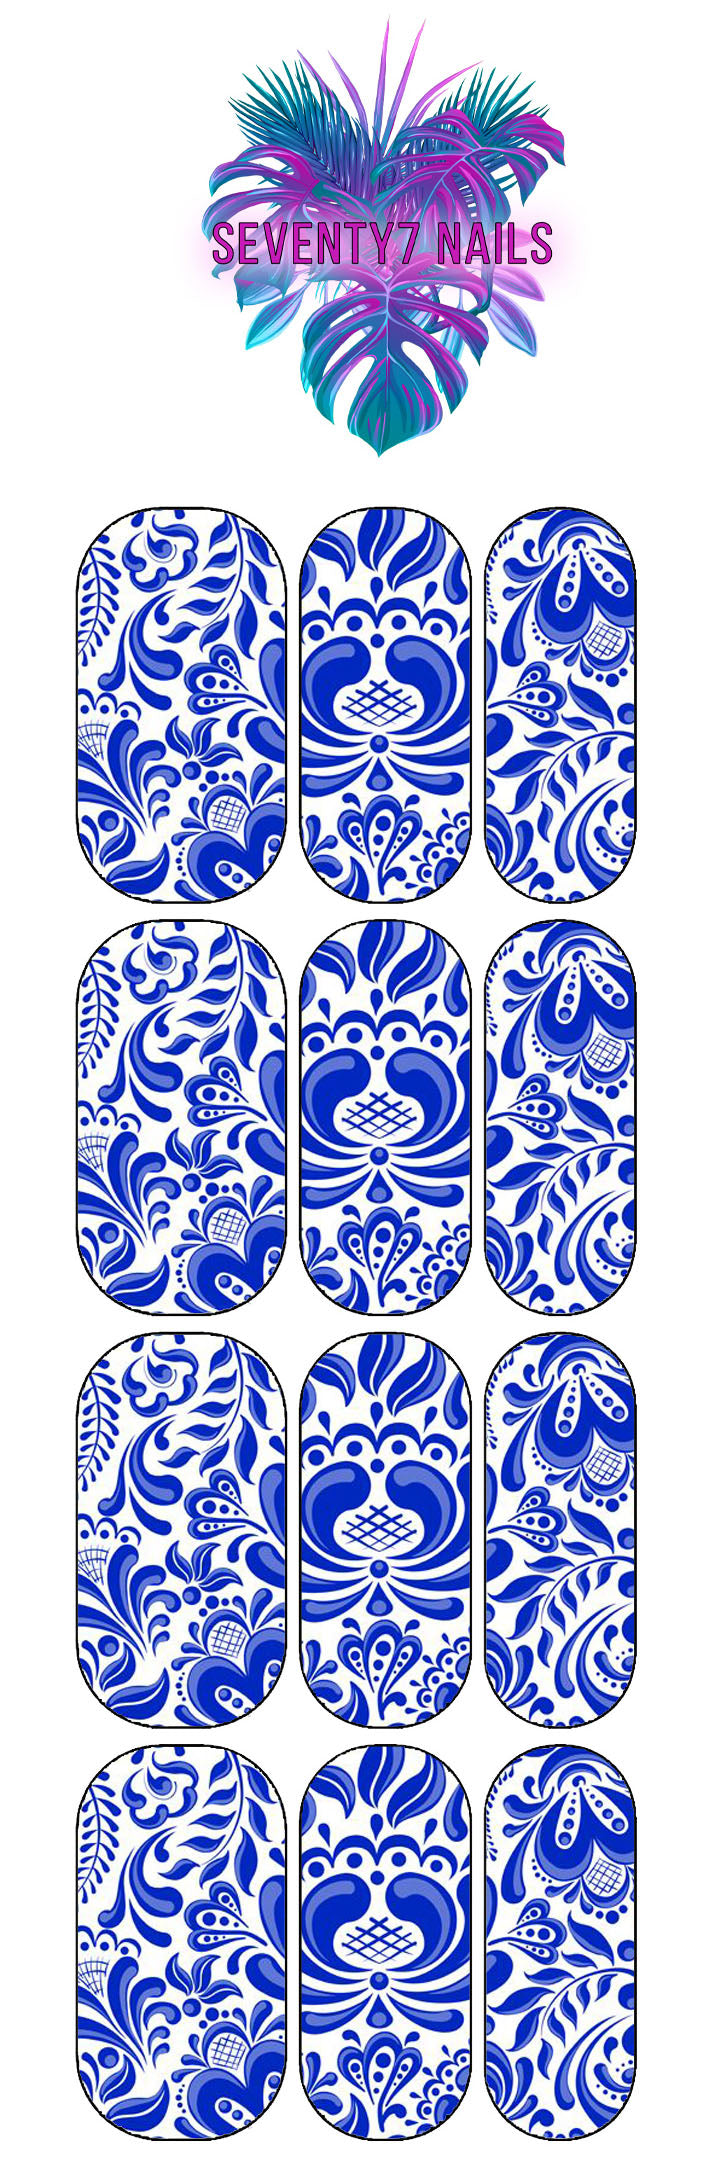 Waterslide Nail Decals - Blue Flourishes